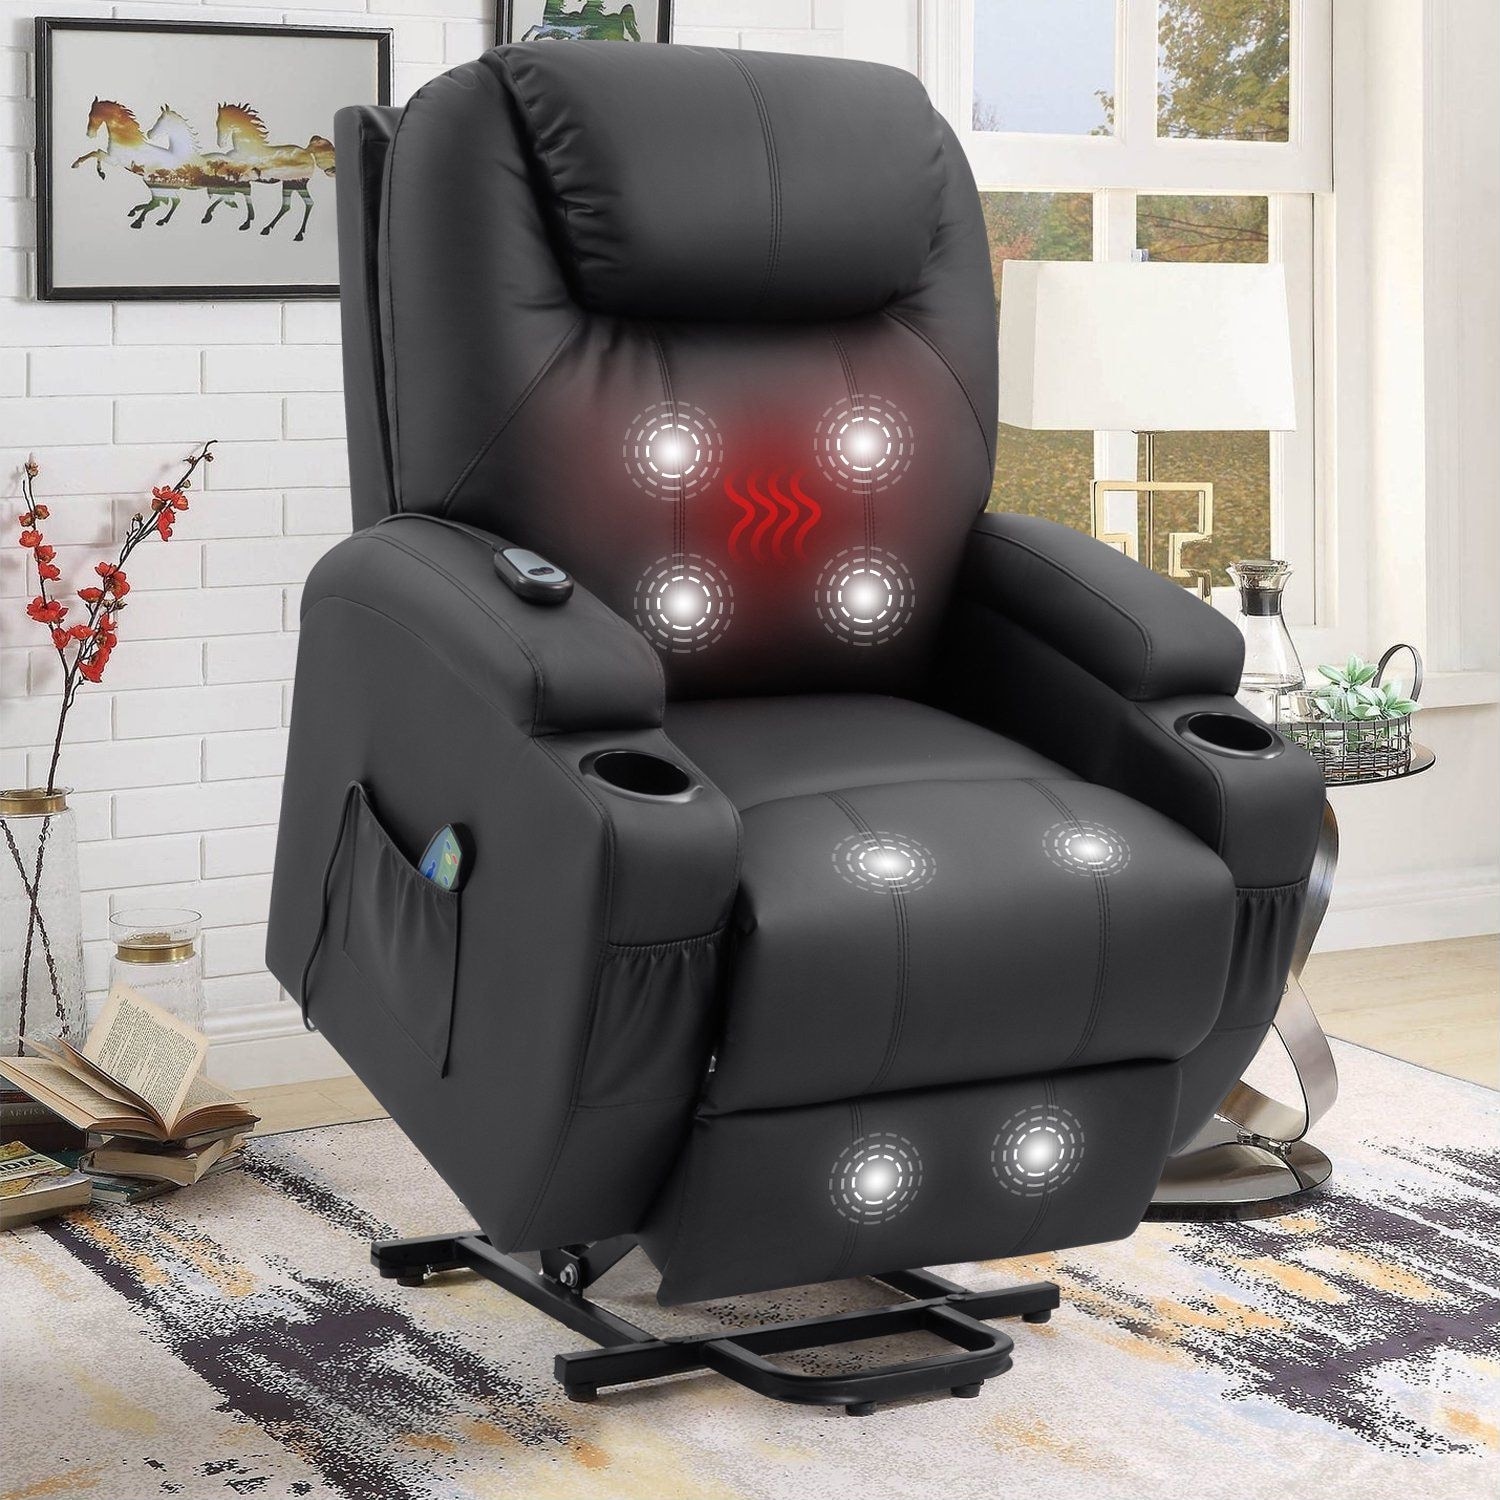 Recliner Computer Chair Office Gaming Mobile Floor Massage